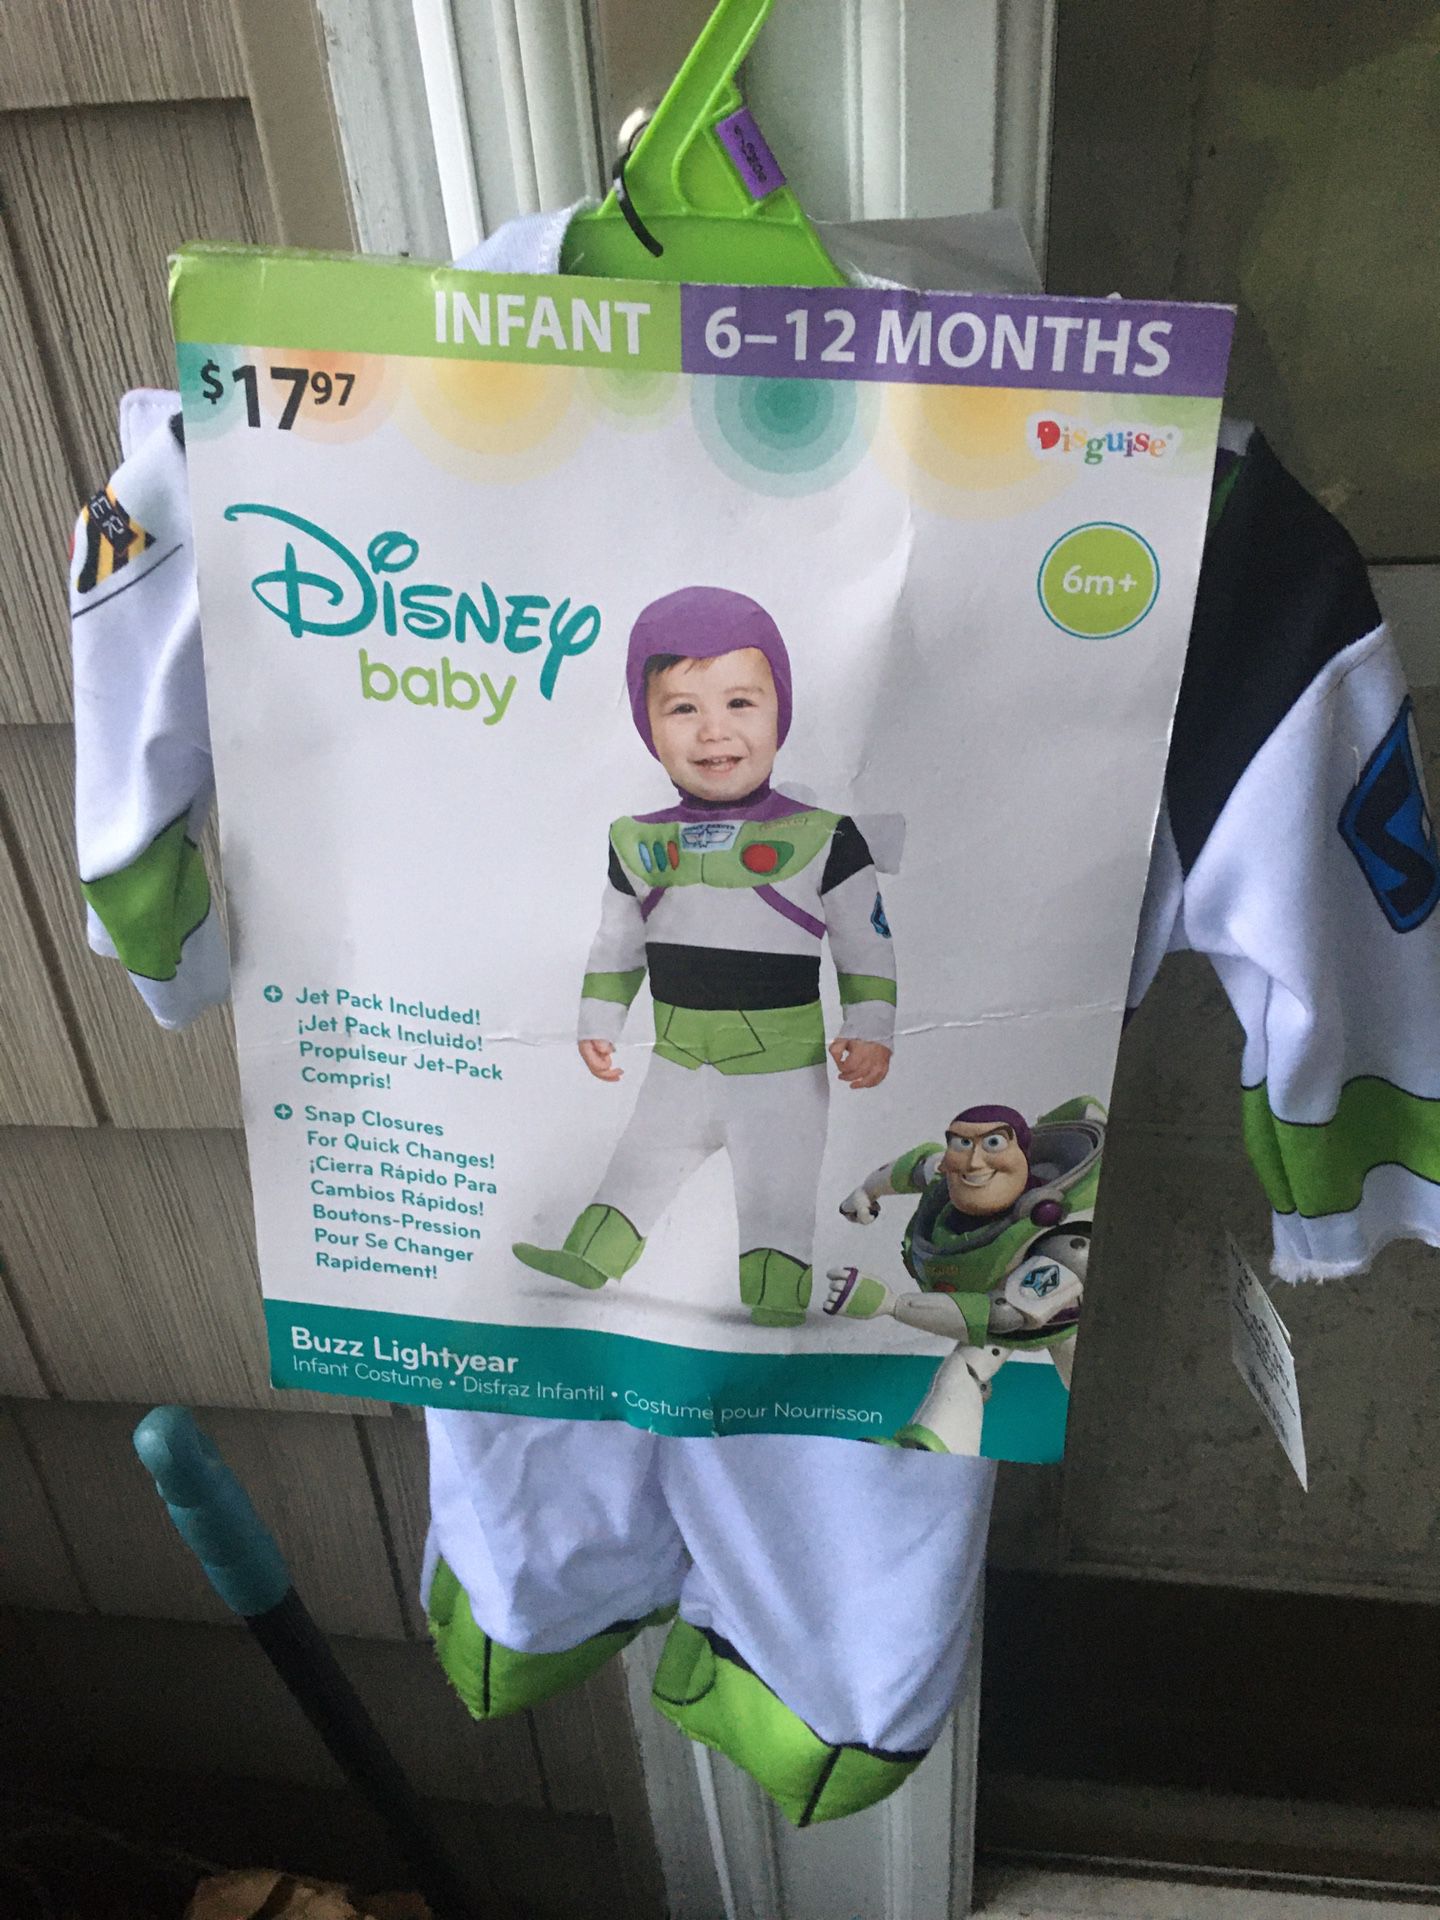 New toddler’s costume only $15 firm